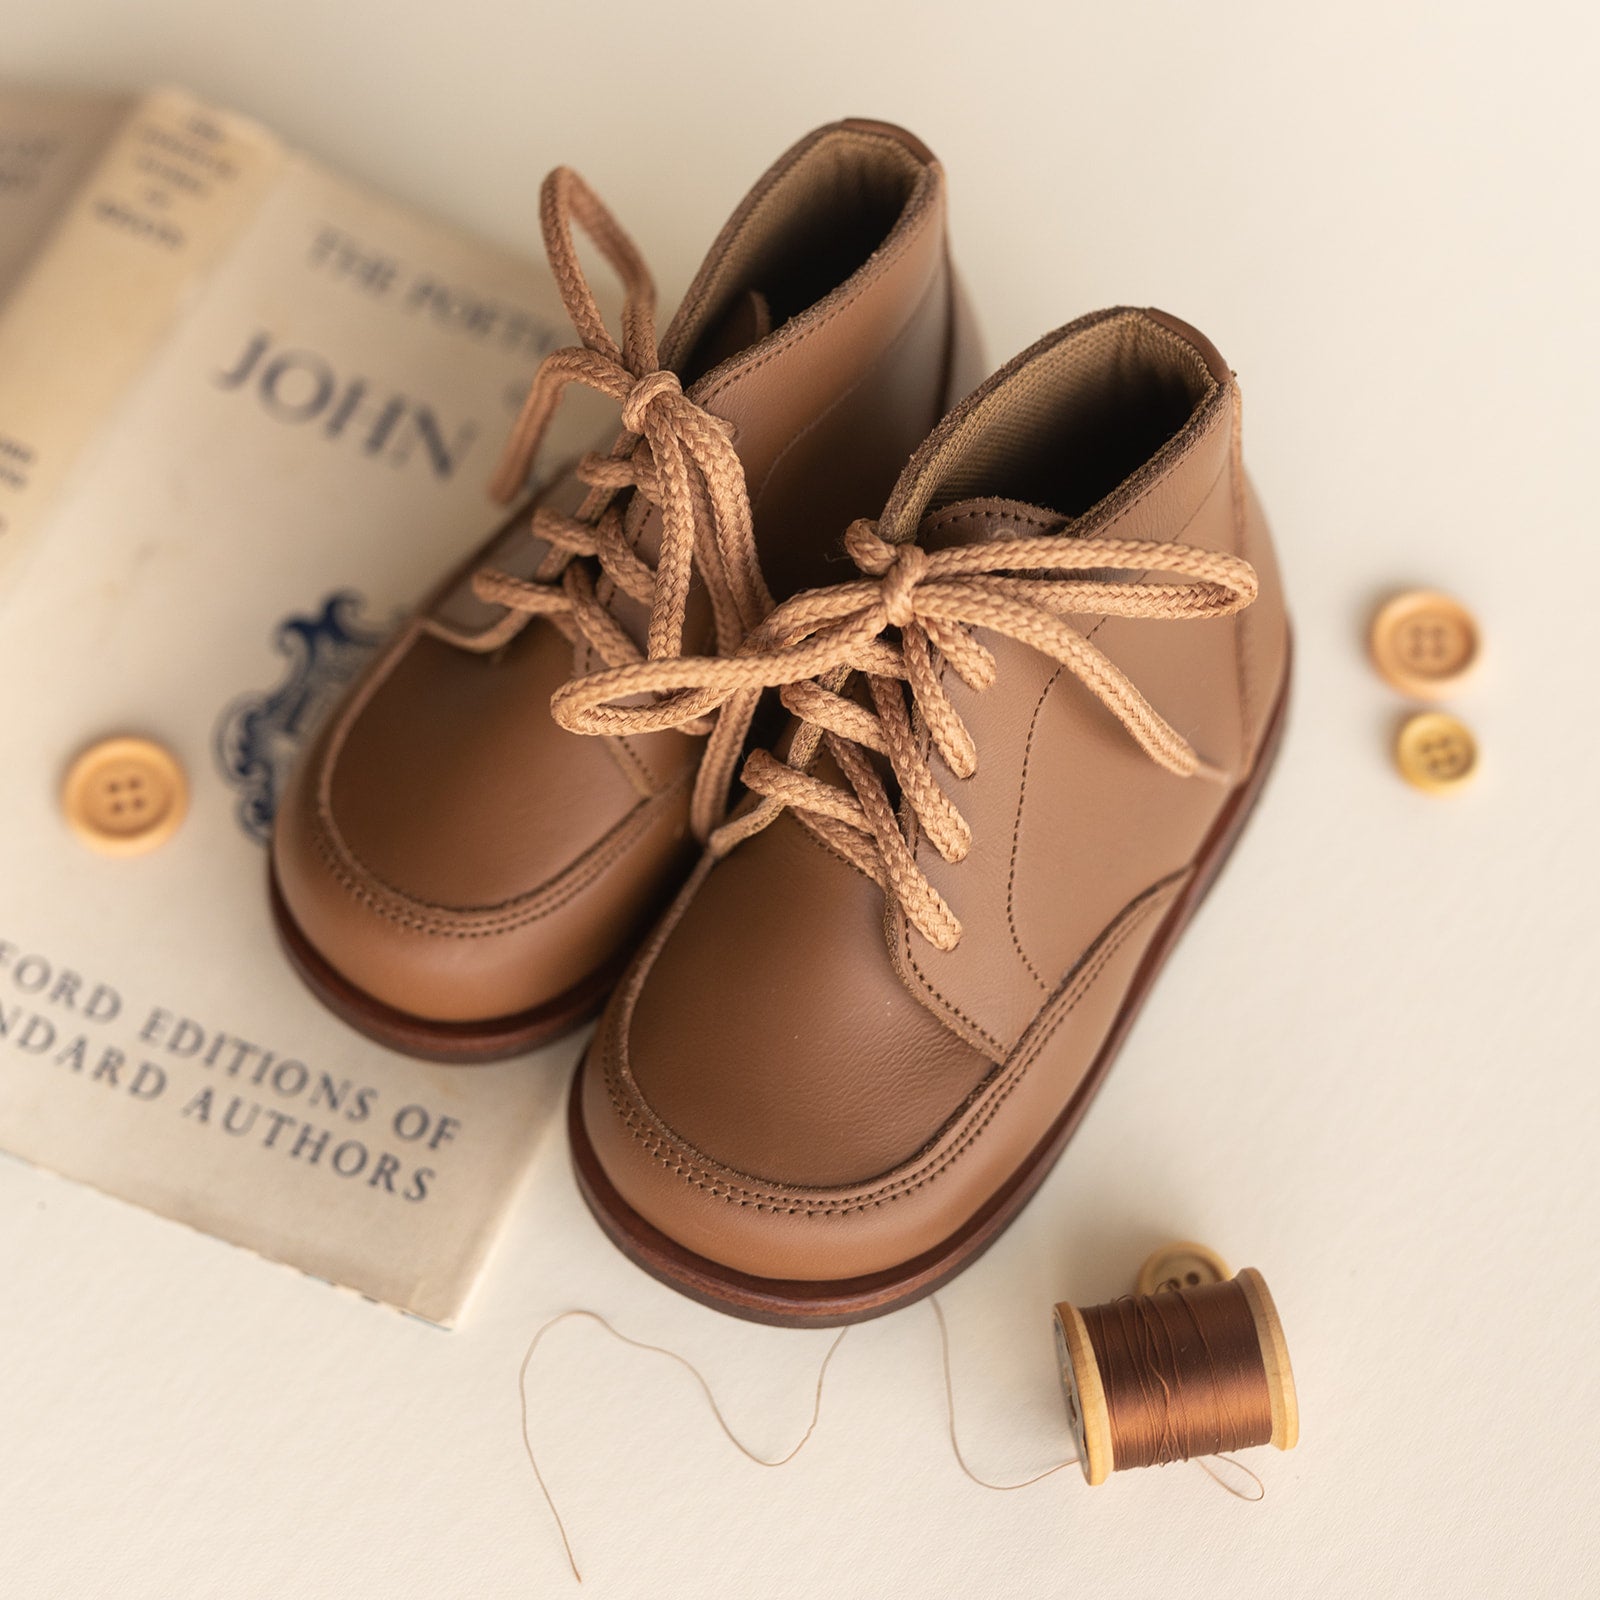 Adelisa &amp; Co. Vintage style leather boots for children. Our Antigua leather boots come in a medium brown leather and feature a simplistic design with a round toe. Unisex style